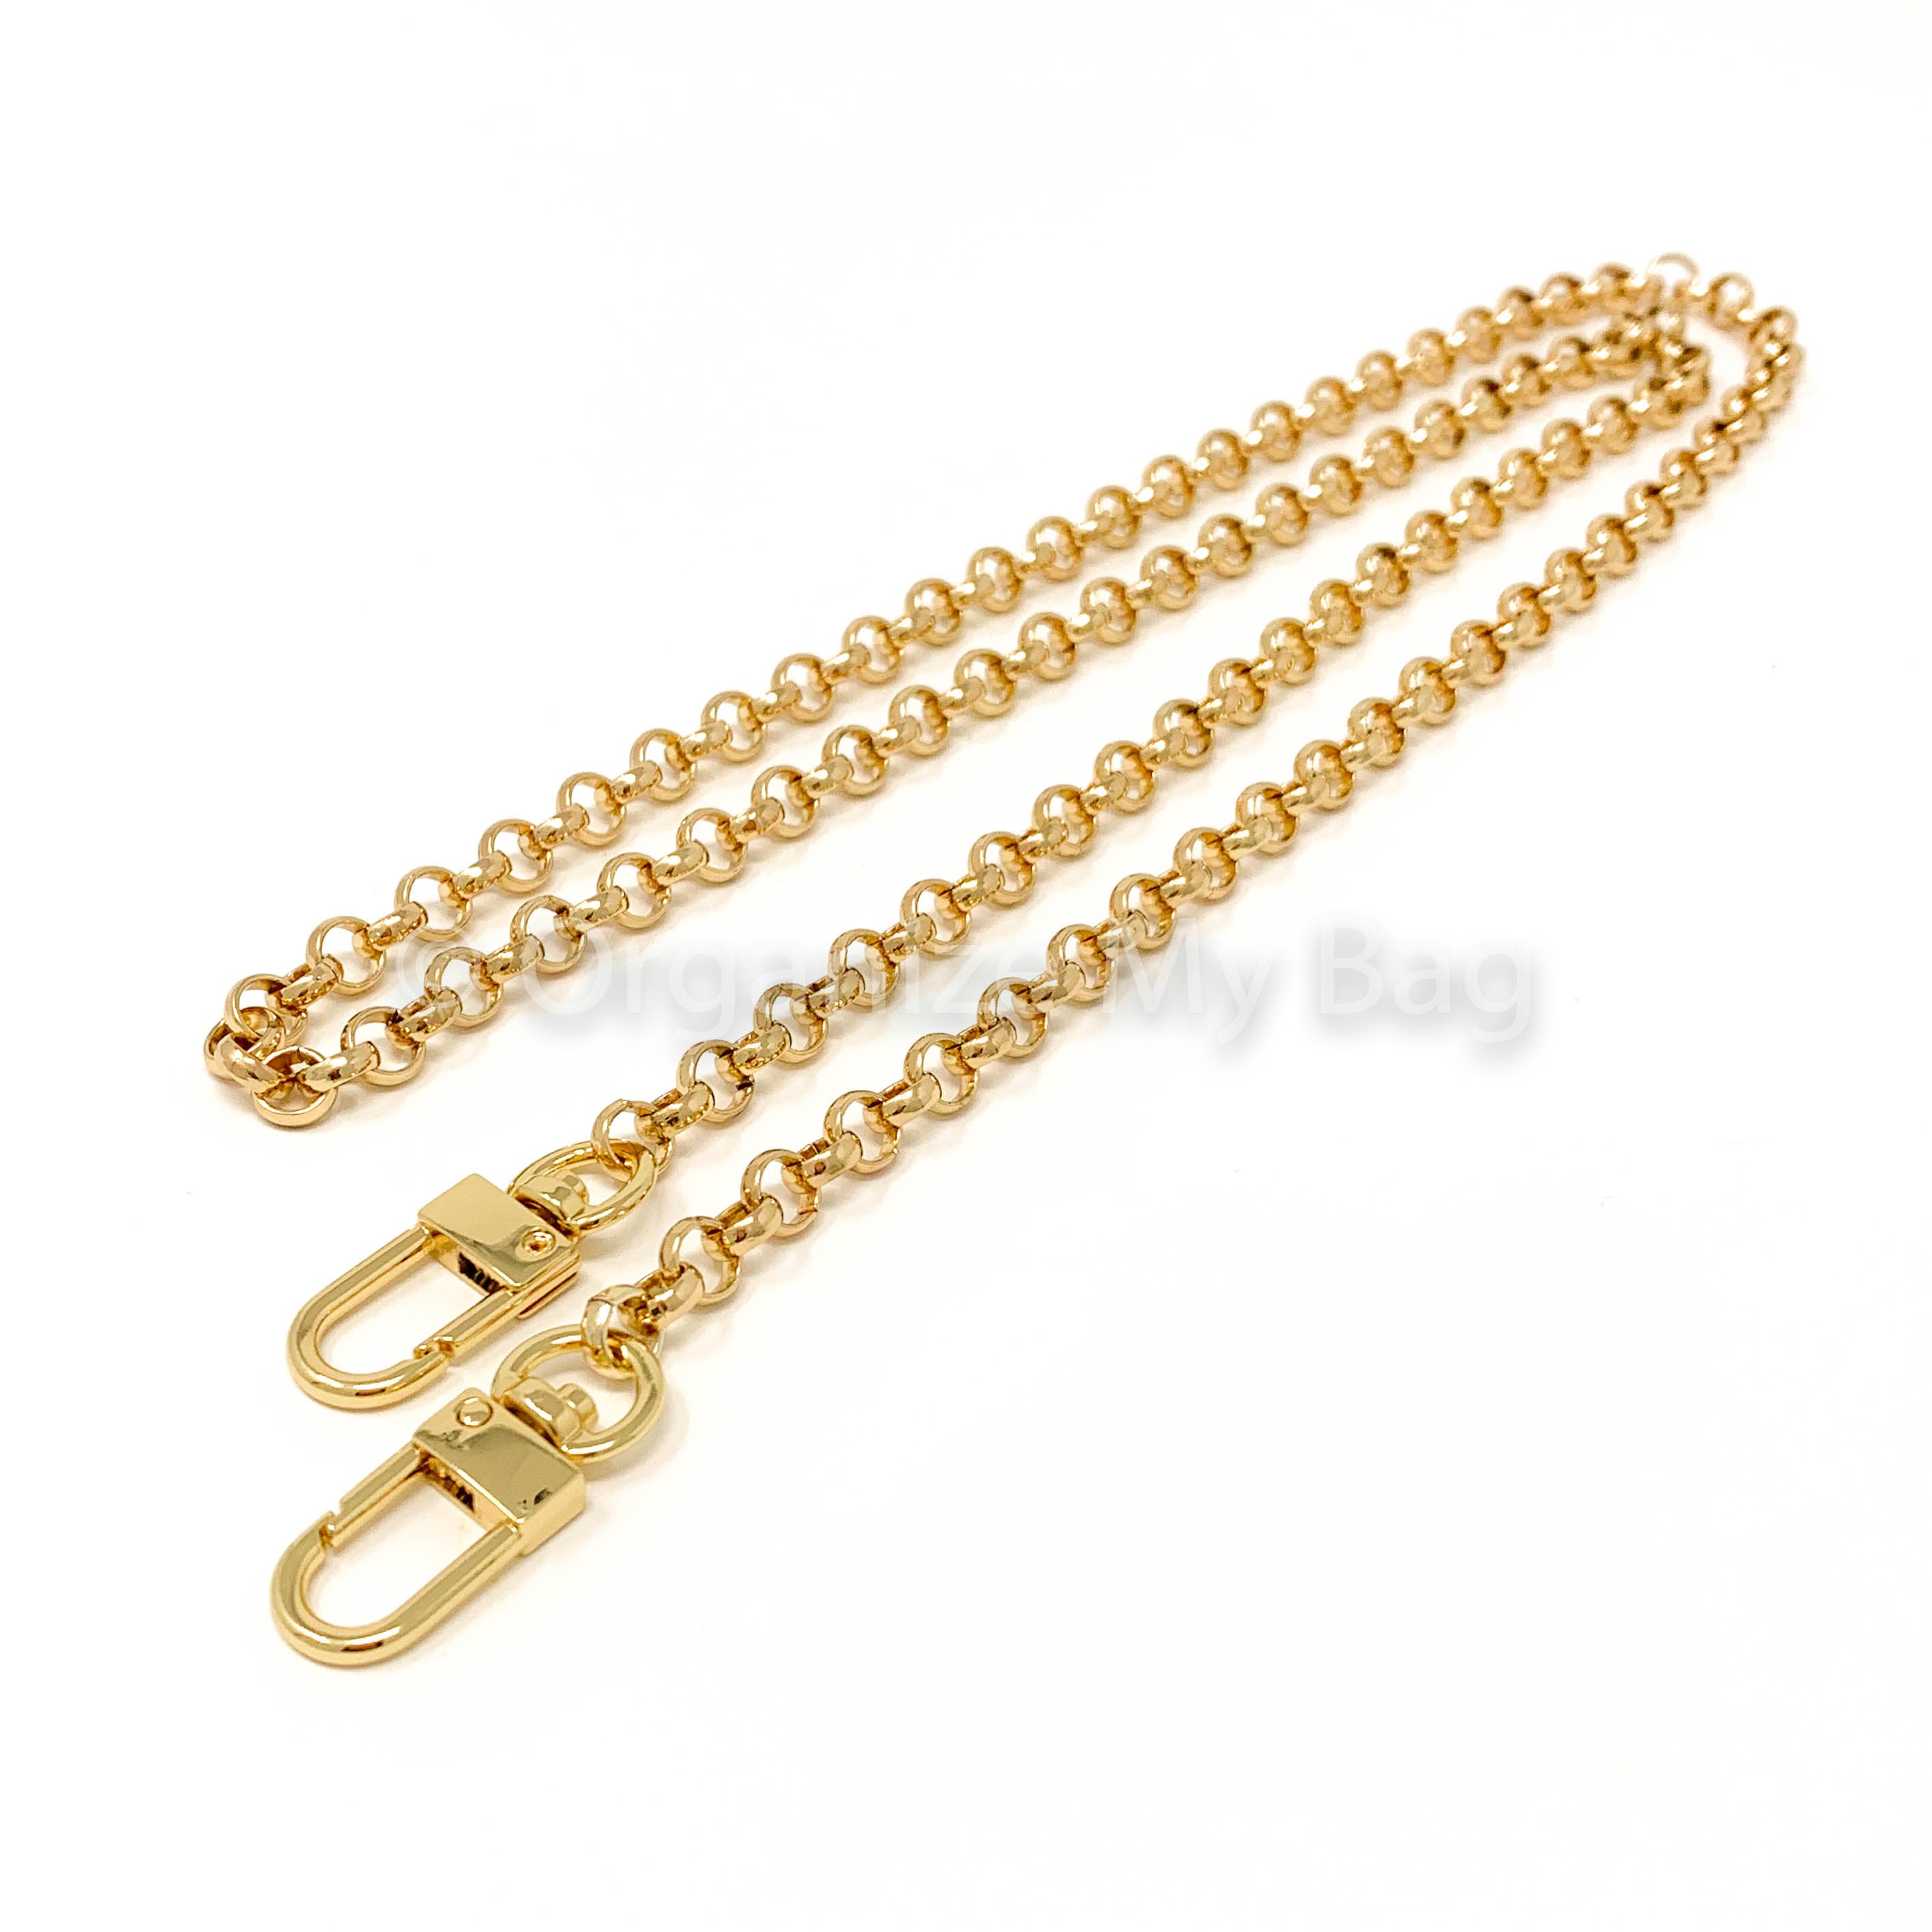 Luxury Crossbody Strap Oval Chain Gold or Silver for Your Bags 